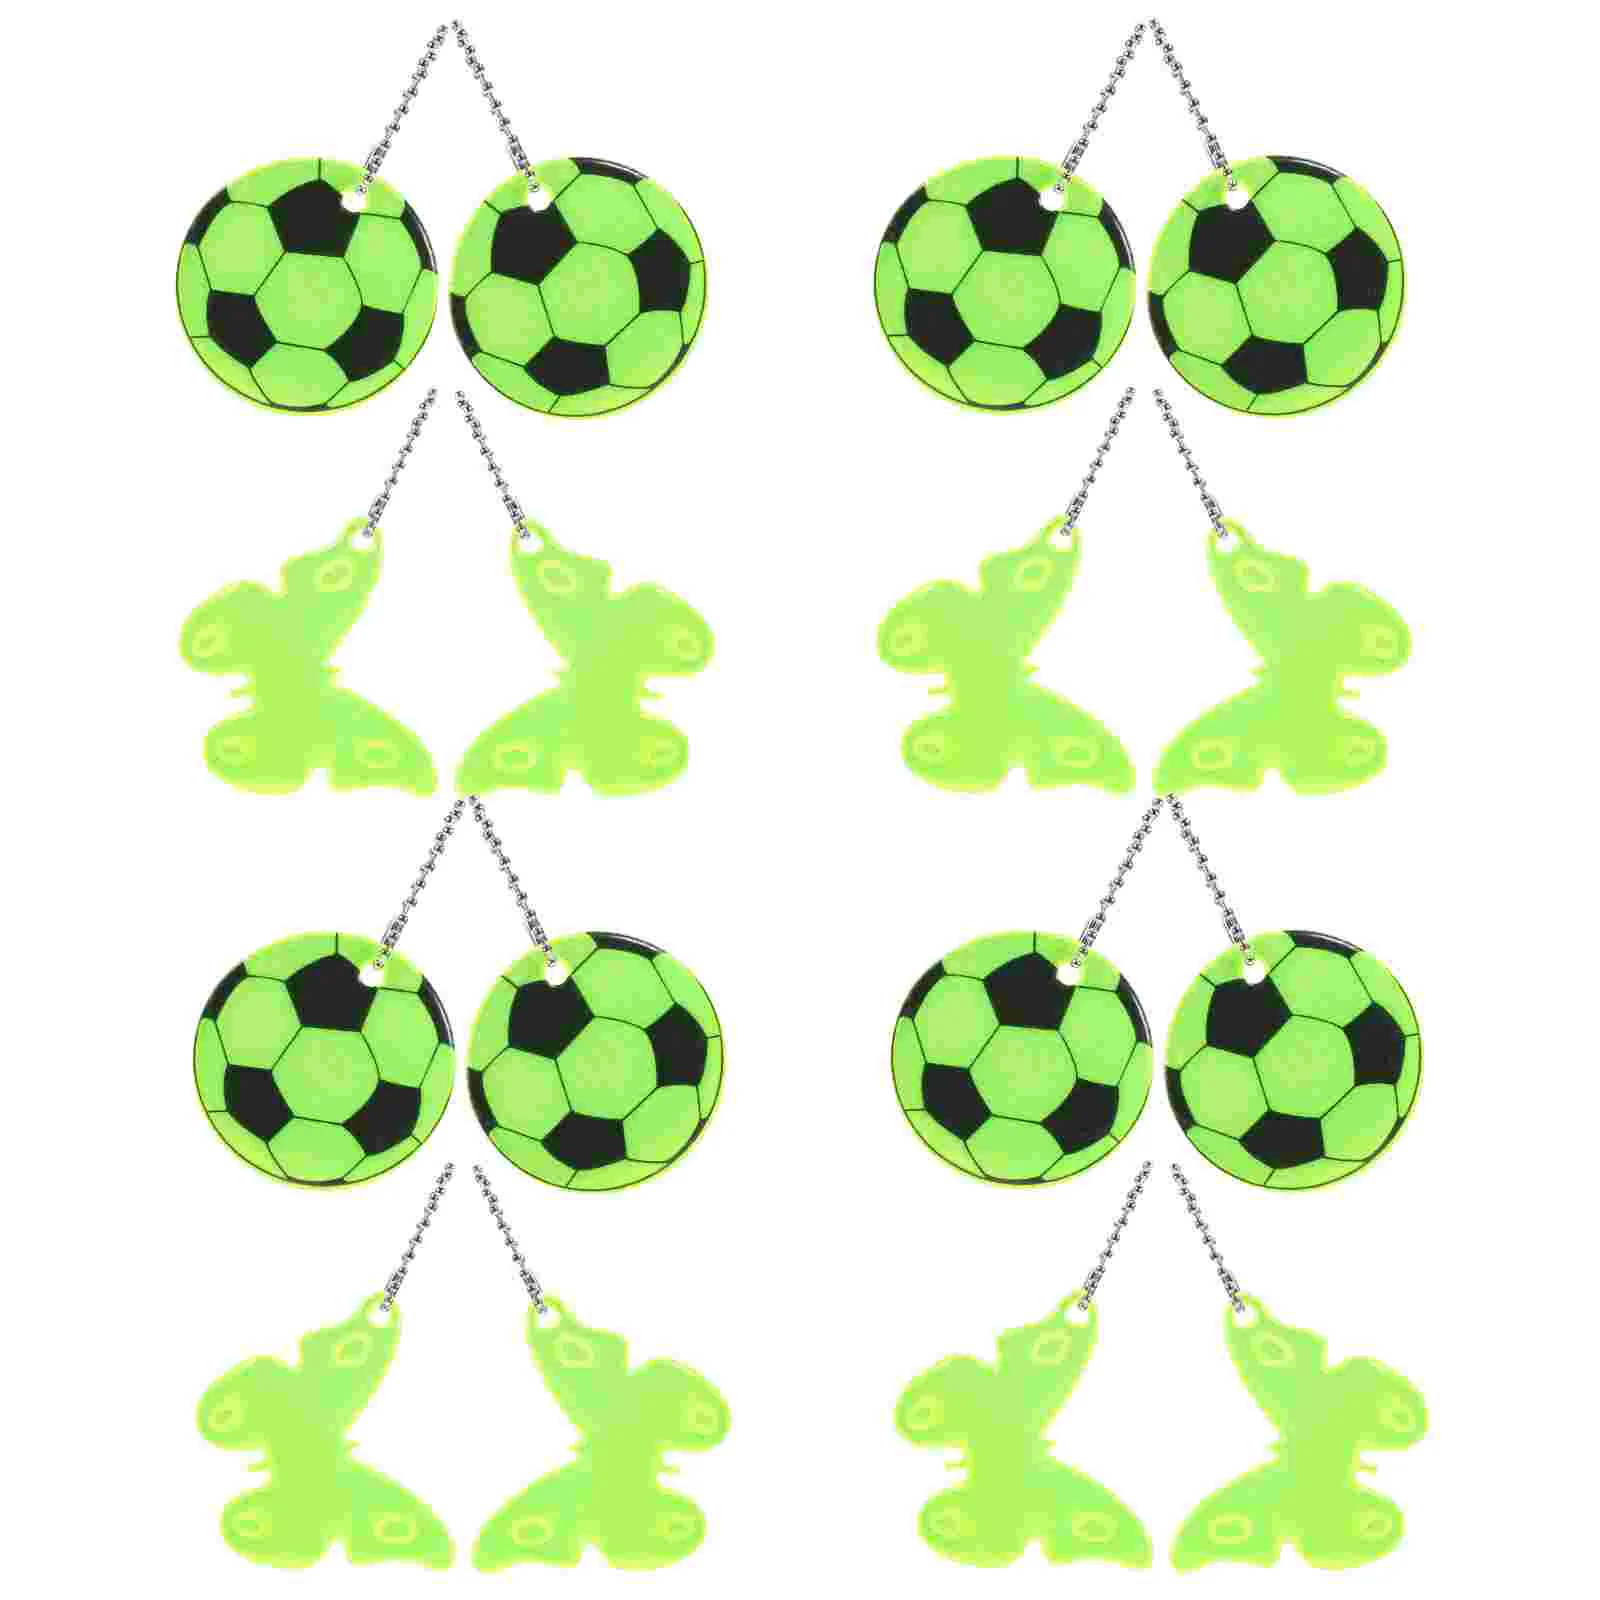 

Mini Soccer Keychain Hanging Keychains Adorable Bag Pendant Accessories for Miniature Butterfly Compact